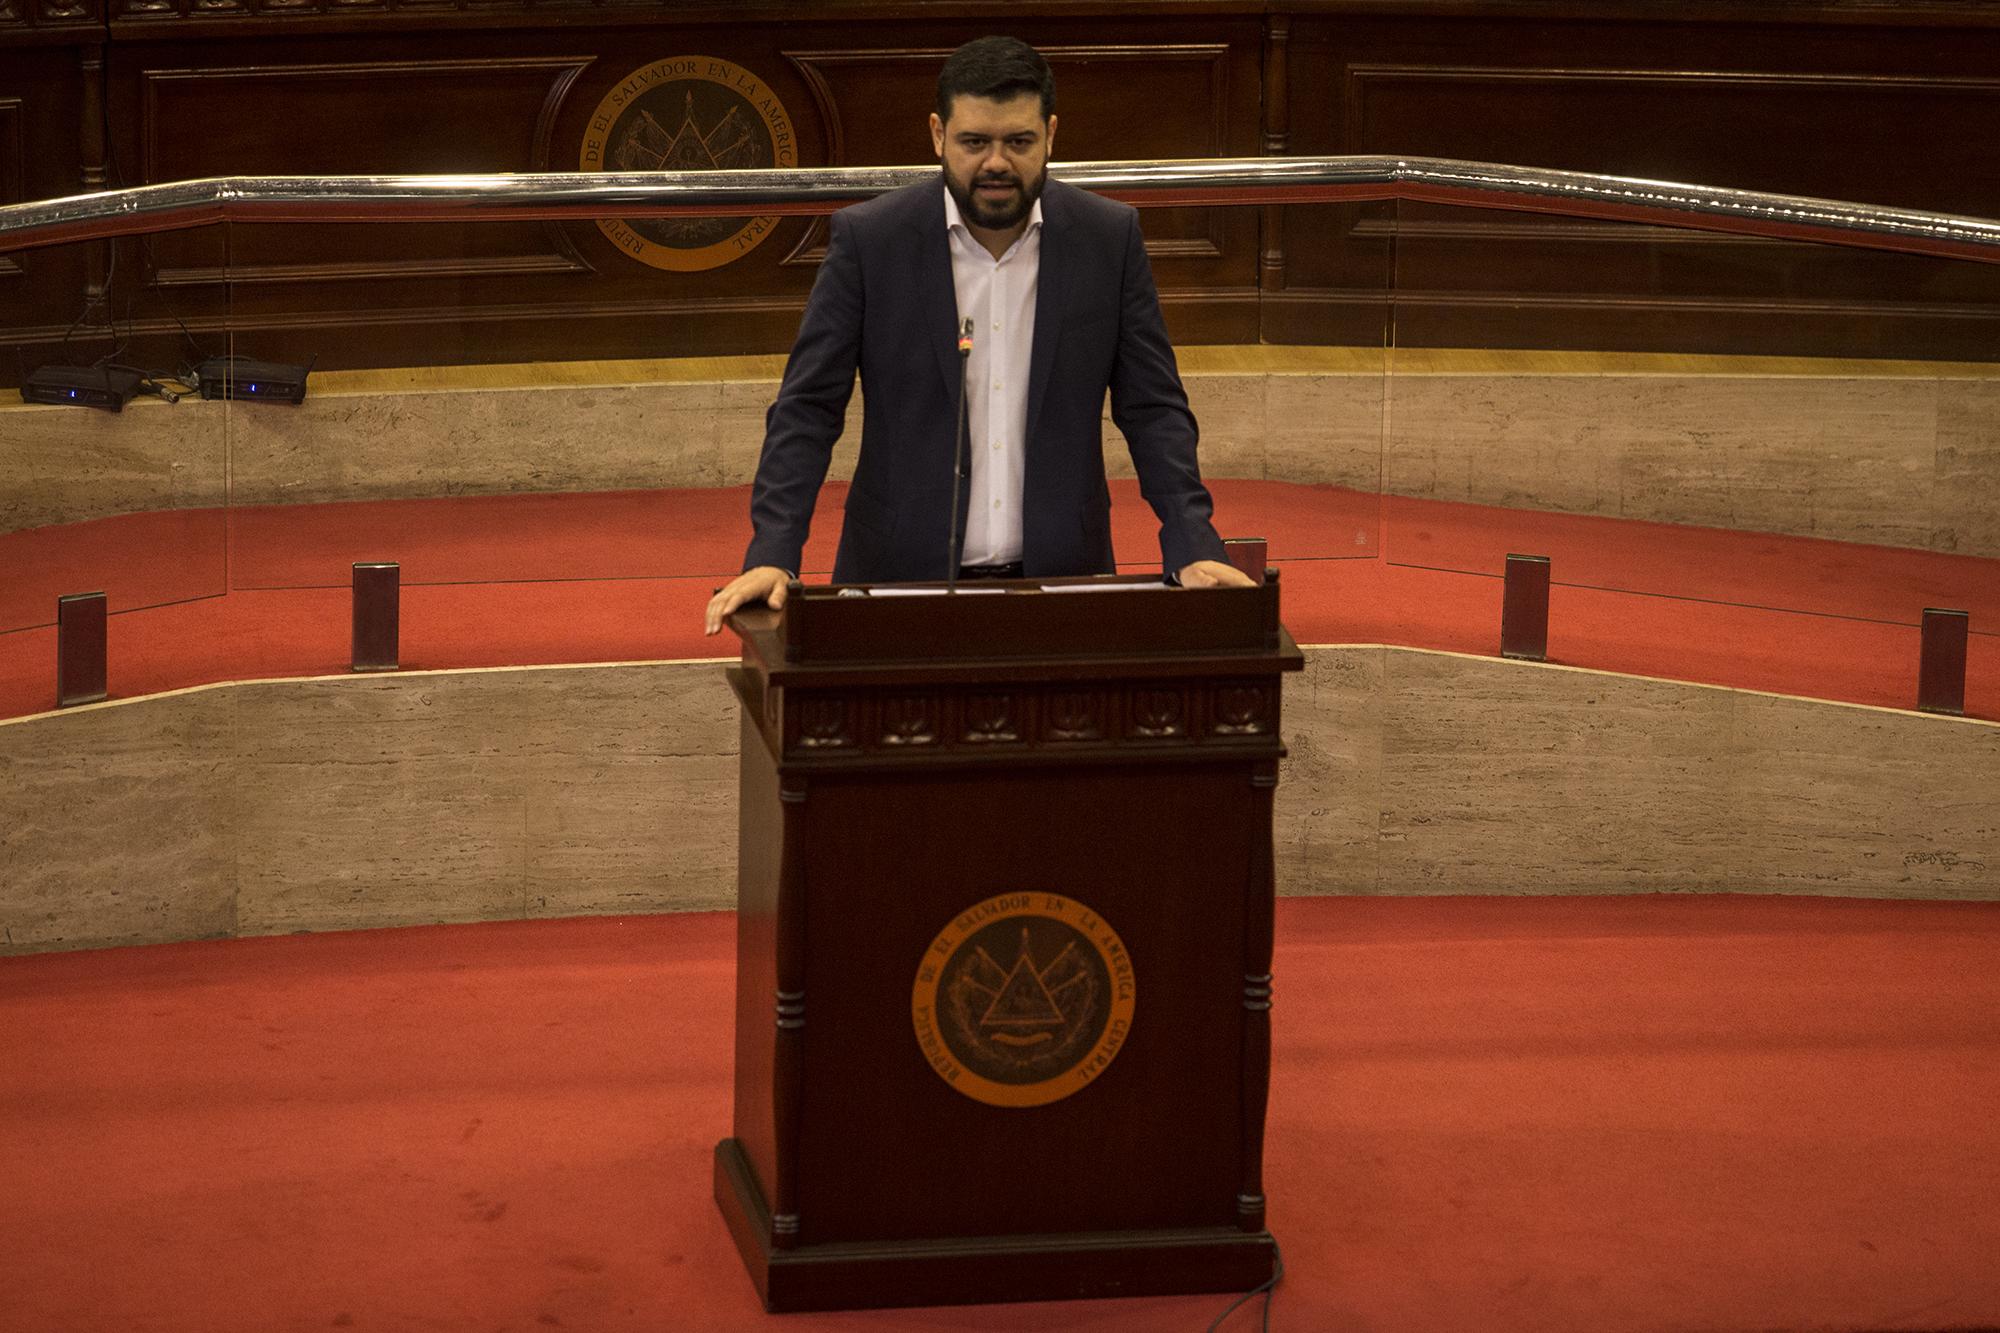 Rogelio Rivas, Minister of Justice and Security, during a debriefing of his first year in office, which took place on July 23, 2020 in the Legislative Assembly’s Salon Azul [Blue Room]. Photo: Victor Peña/El Faro